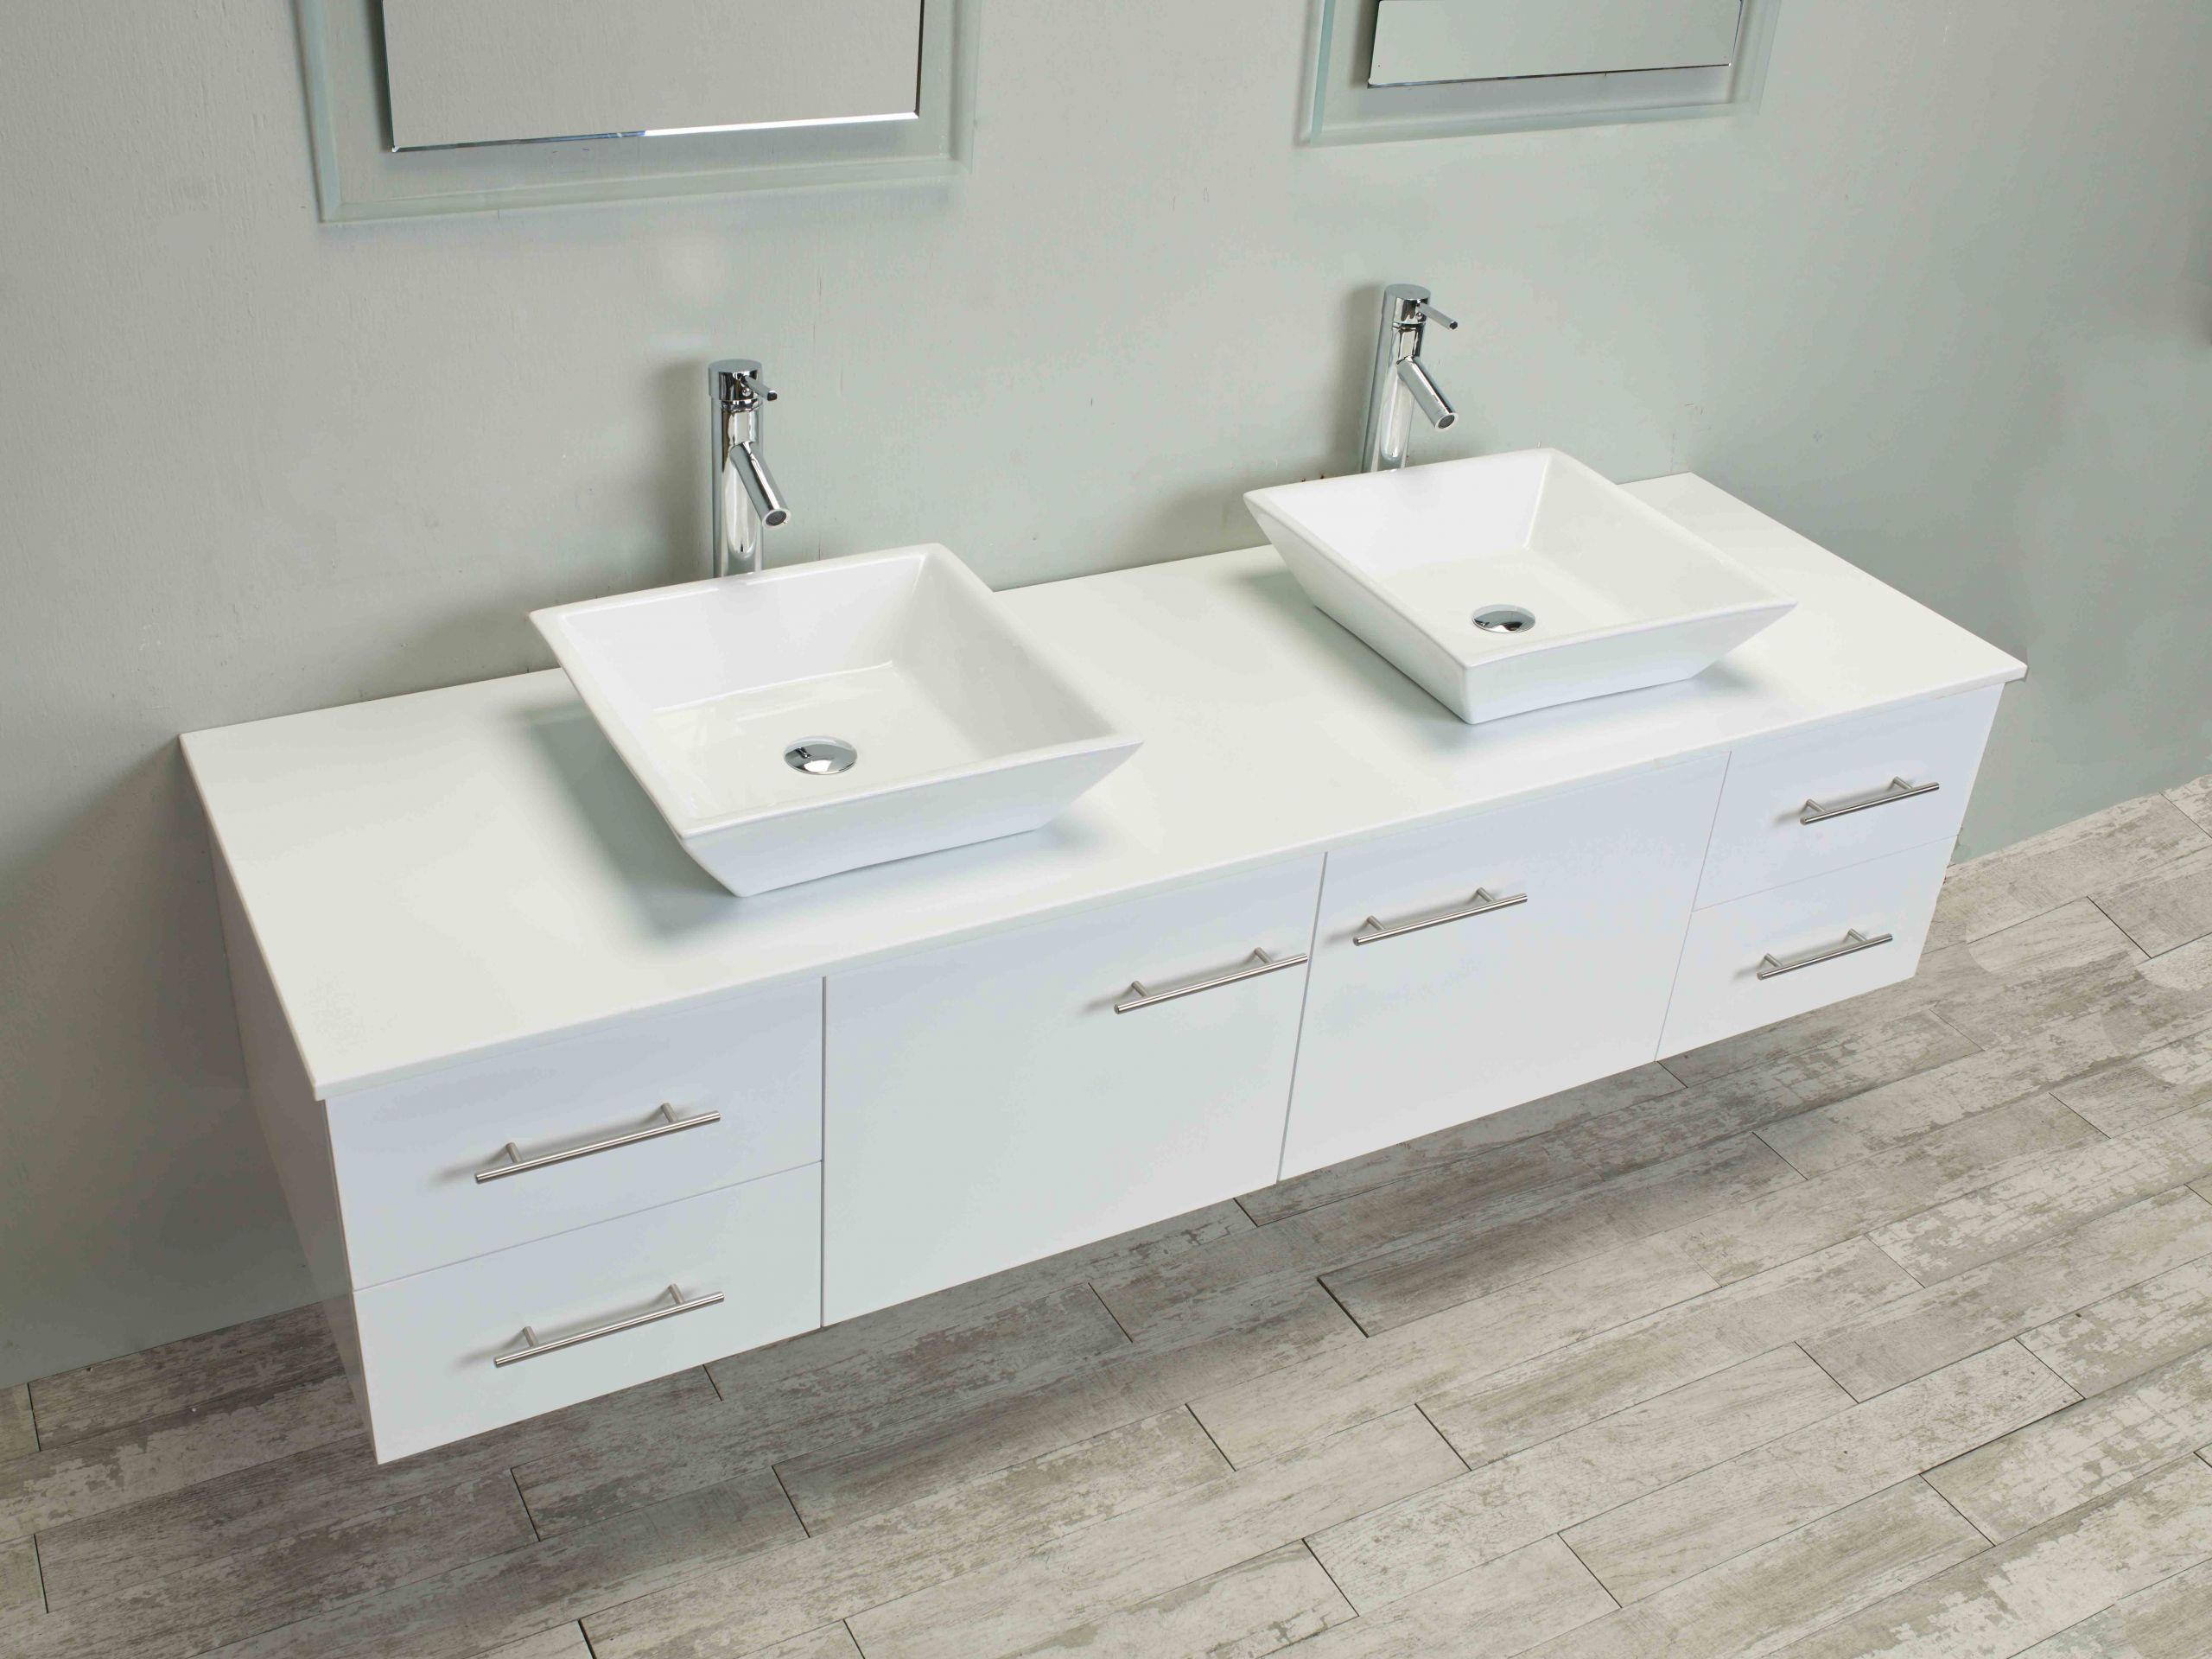 20 inch bathroom sinks with cabinet